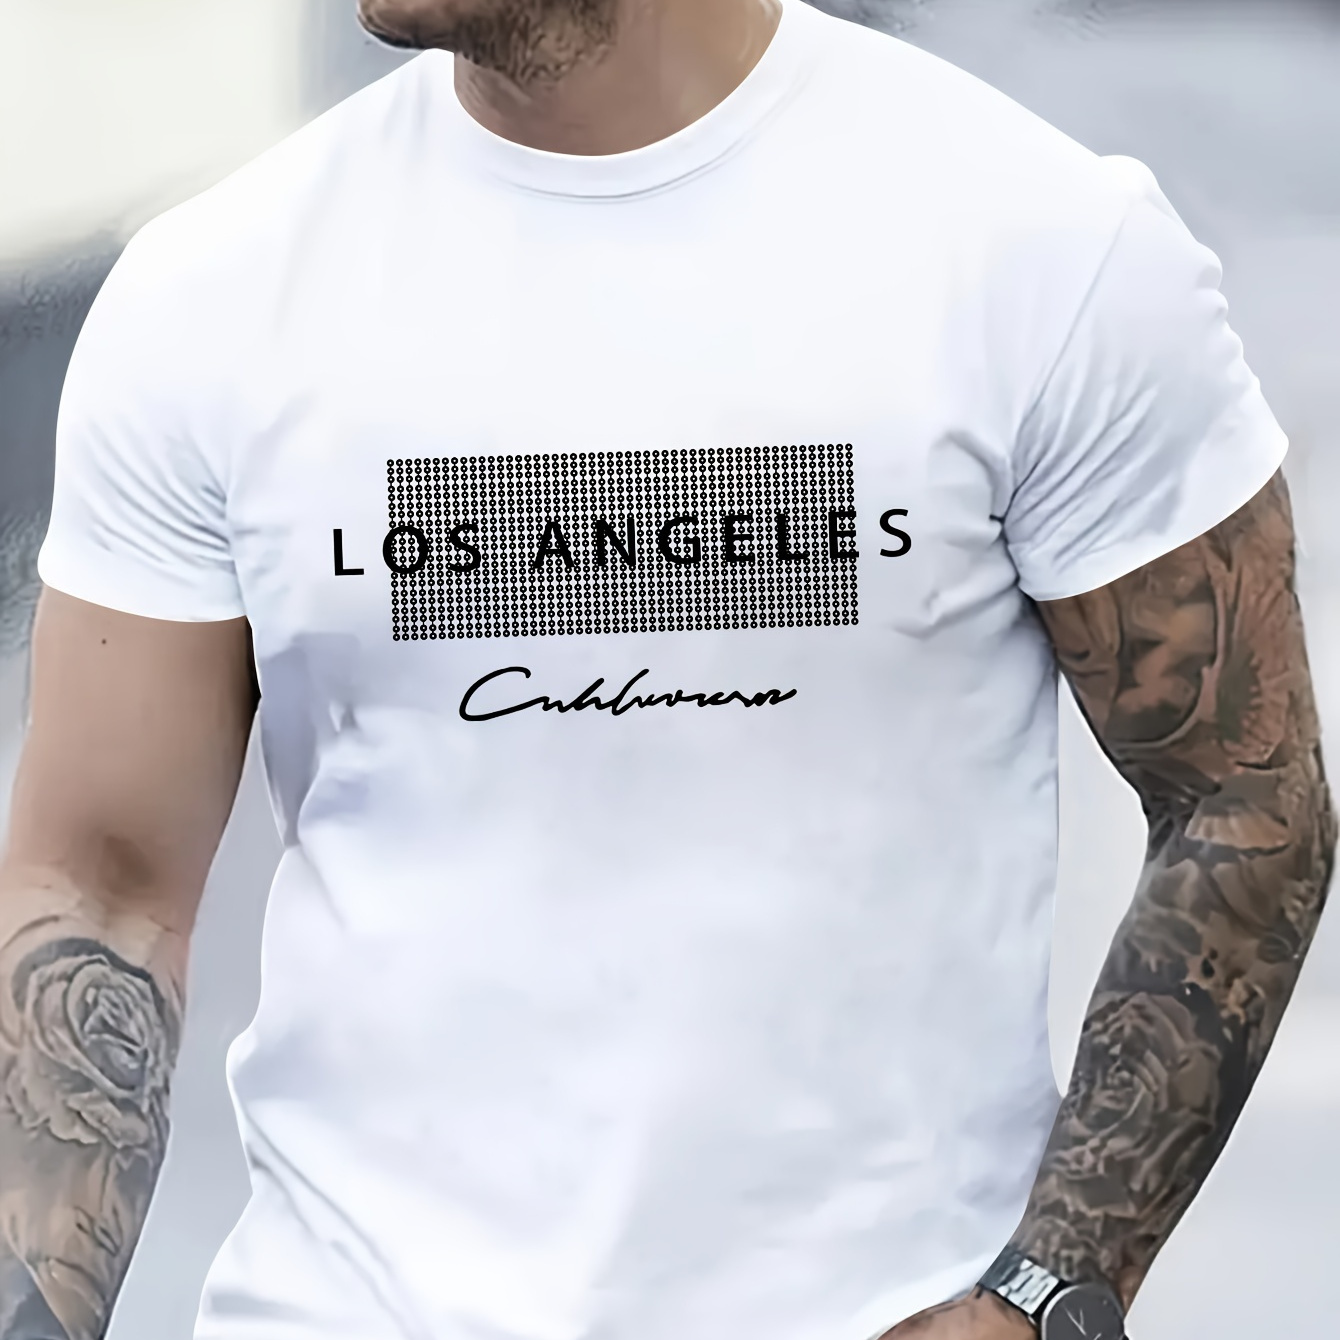 

Los Angeles Print Tee Shirt, Tees For Men, Casual Short Sleeve T-shirt For Summer